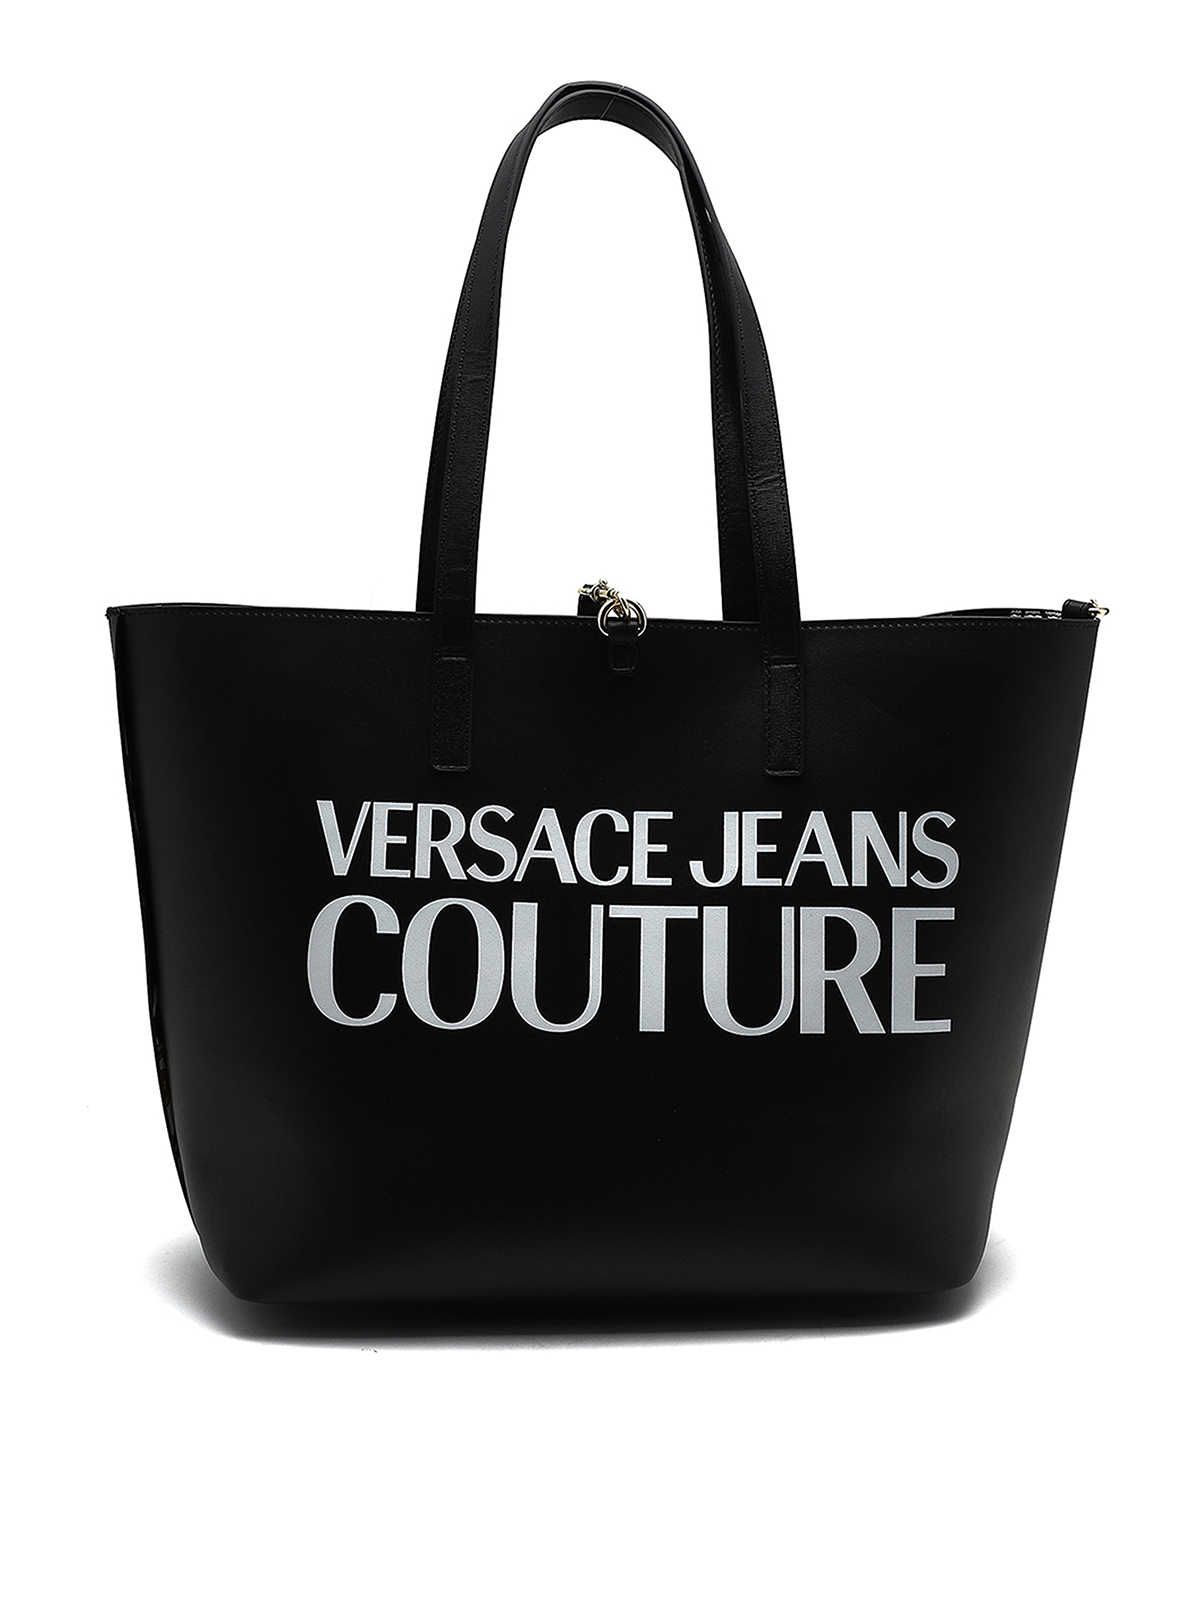 VERSACE JEANS COUTURE ハンドバッグ バロック ブラック-